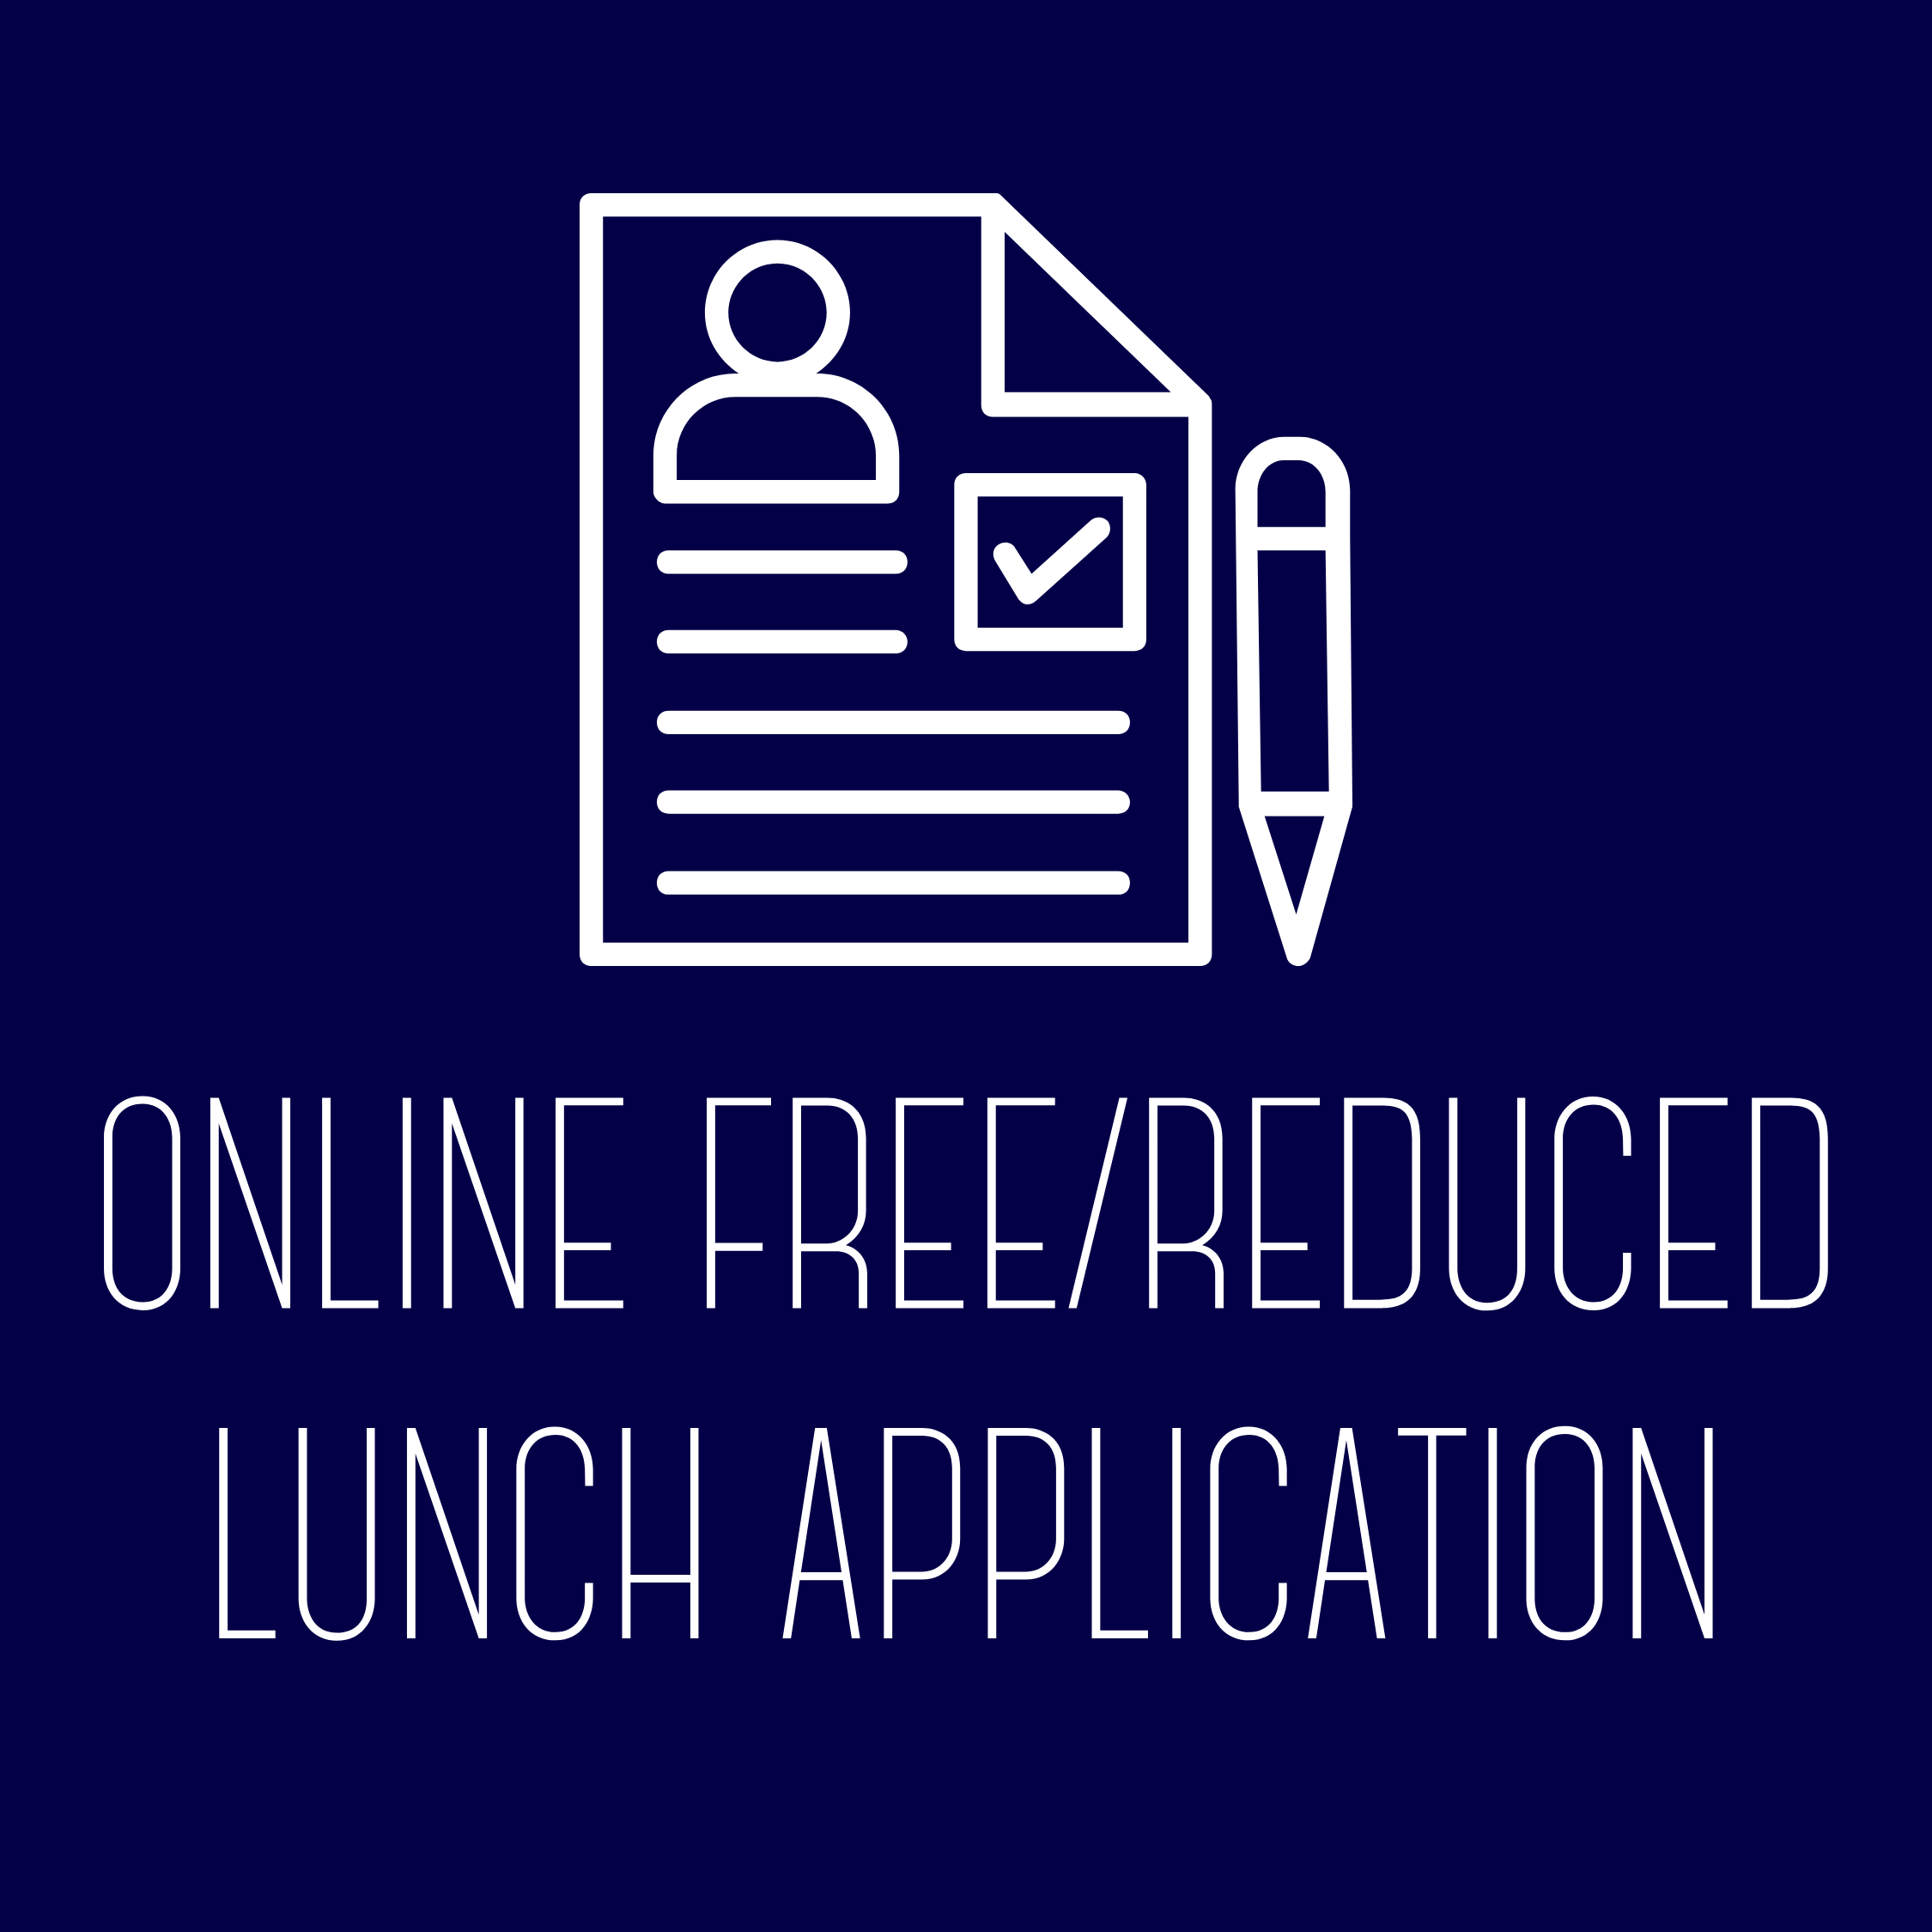 Online Free and Reduced Lunch Application